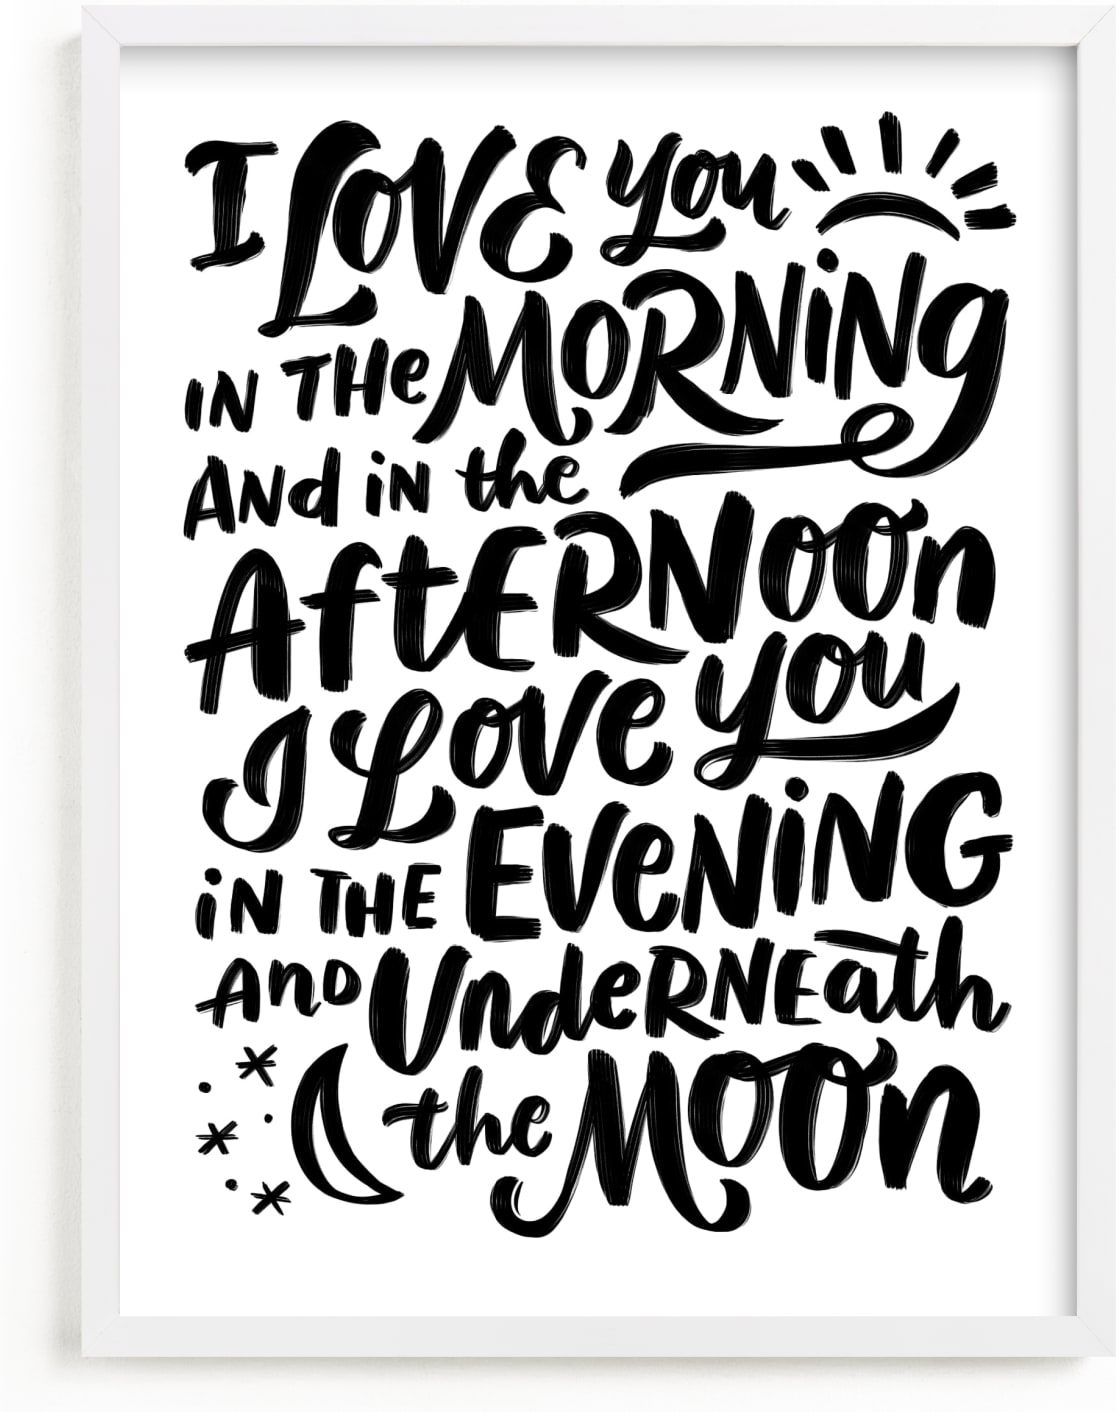 This is a black and white nursery wall art by Laura Bolter called I love you in the morning.